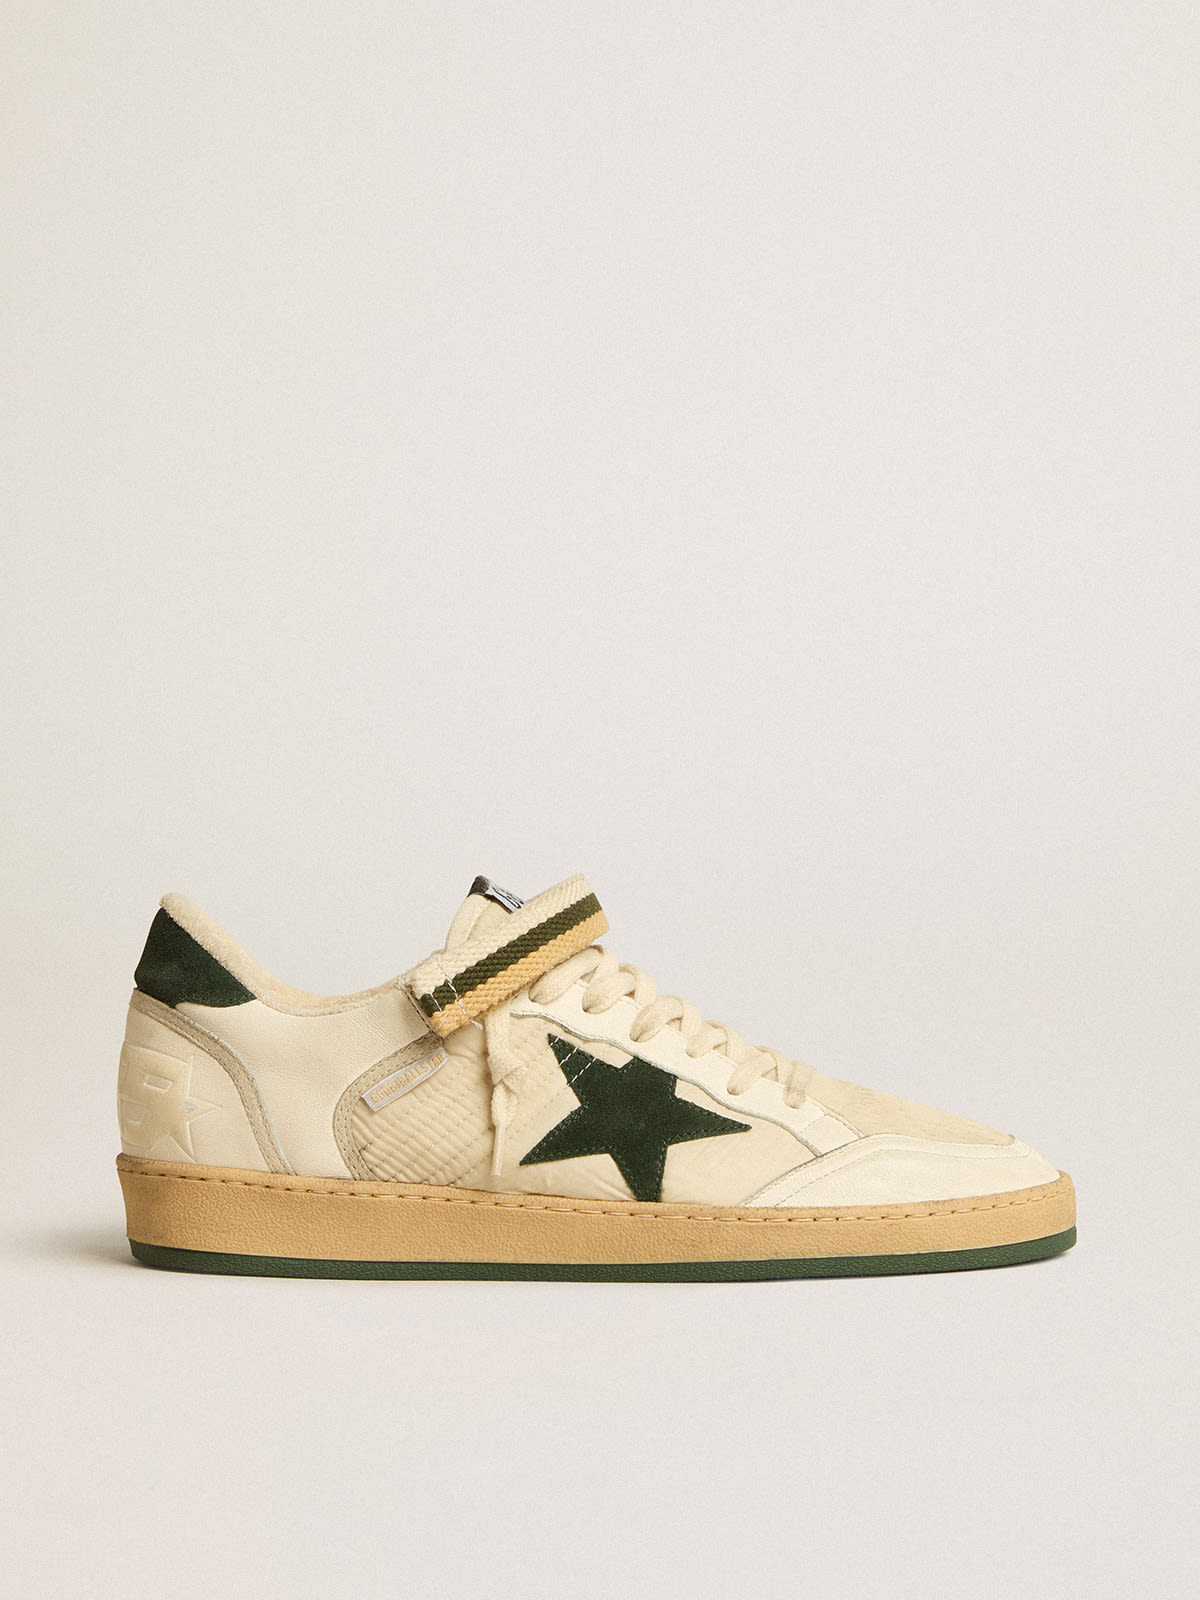 Ball Star in nylon and nappa with green suede star and heel tab | Golden  Goose